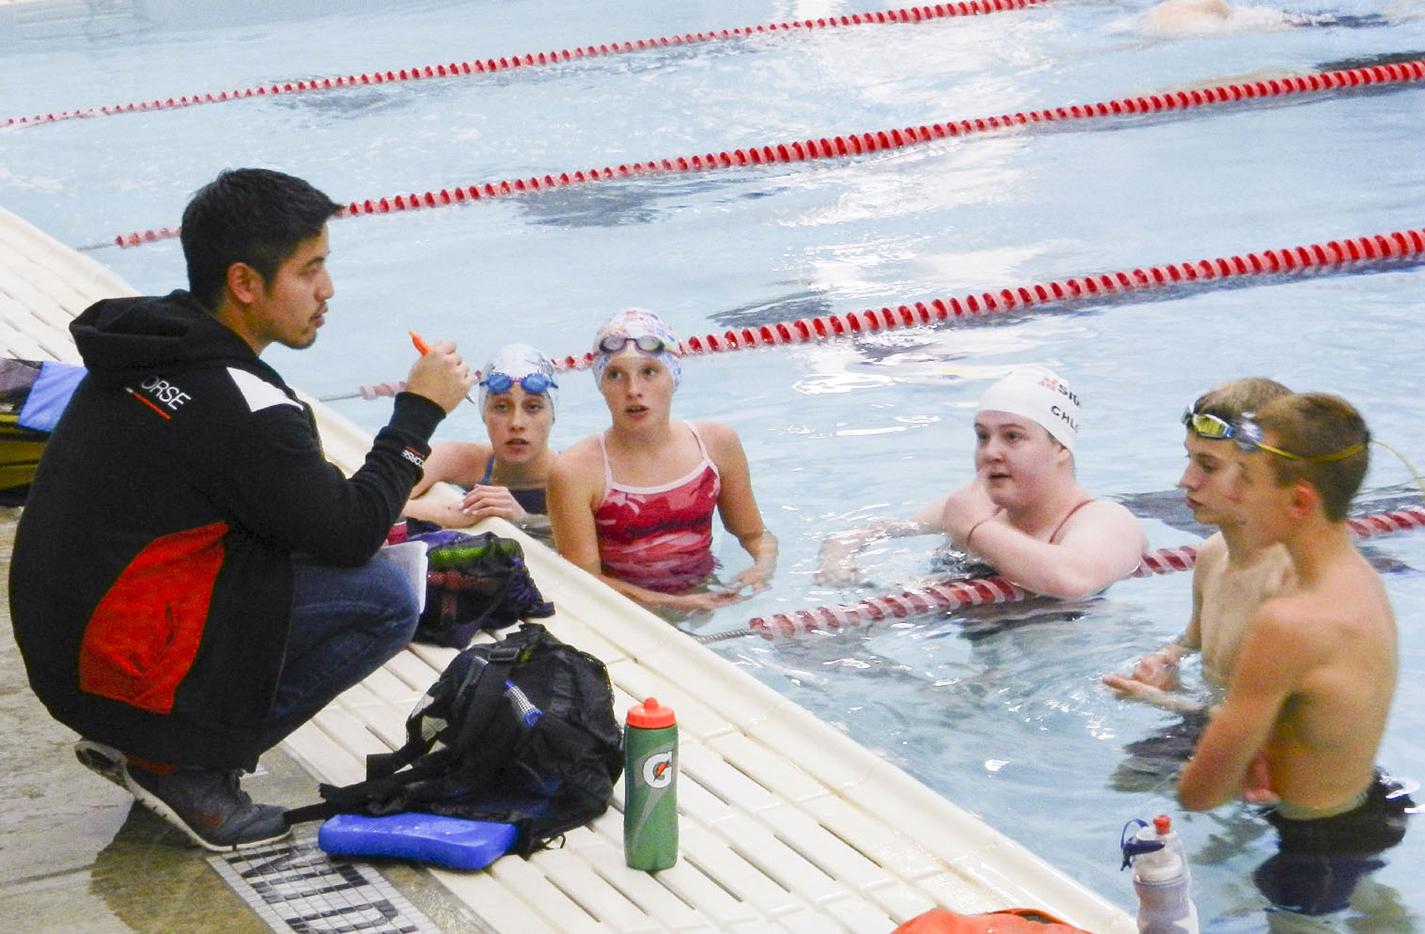 Sigma Swimmers founder and head coach Andrew Ha gives students instructions over technique during a practice session Nov. 9 at the NW pool.